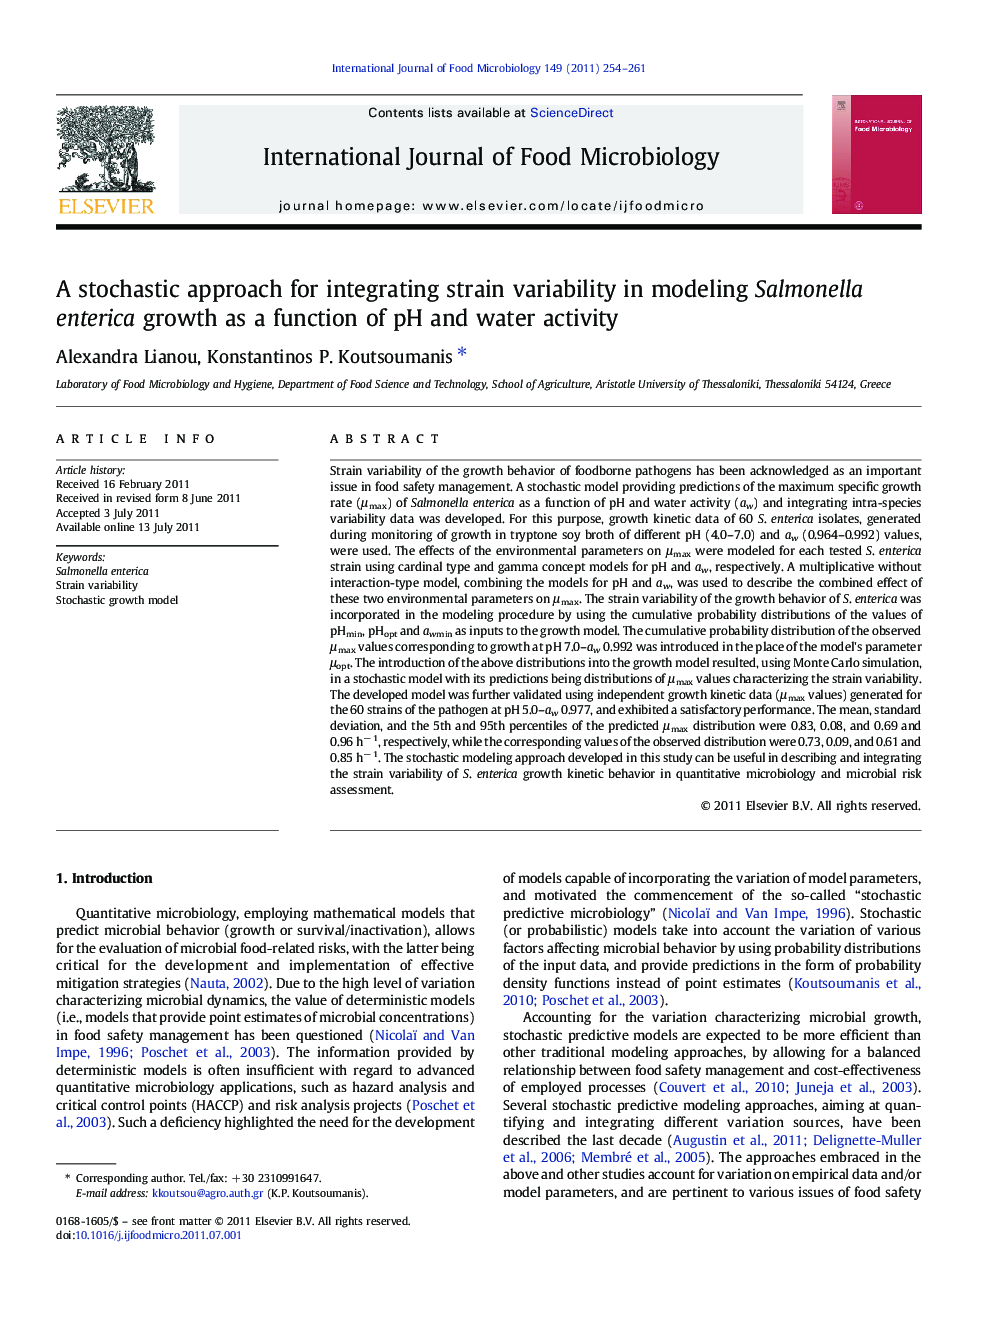 A stochastic approach for integrating strain variability in modeling Salmonella enterica growth as a function of pH and water activity